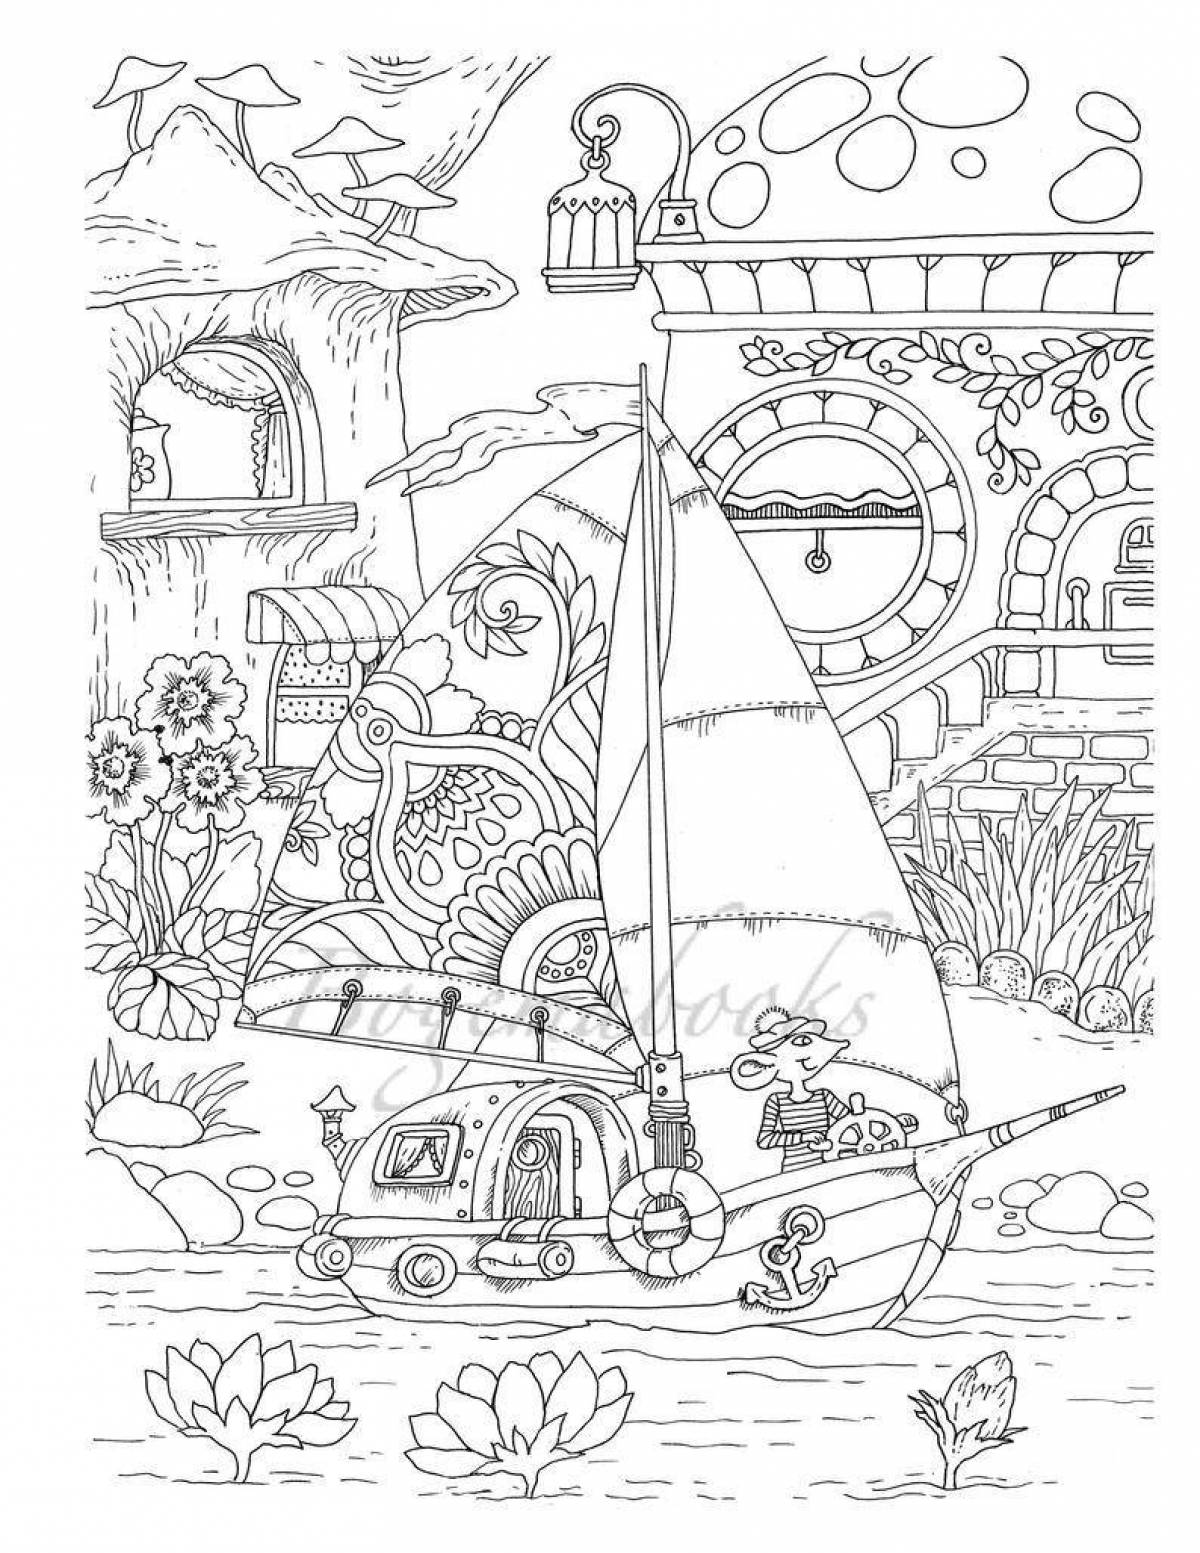 Amazing little town coloring book